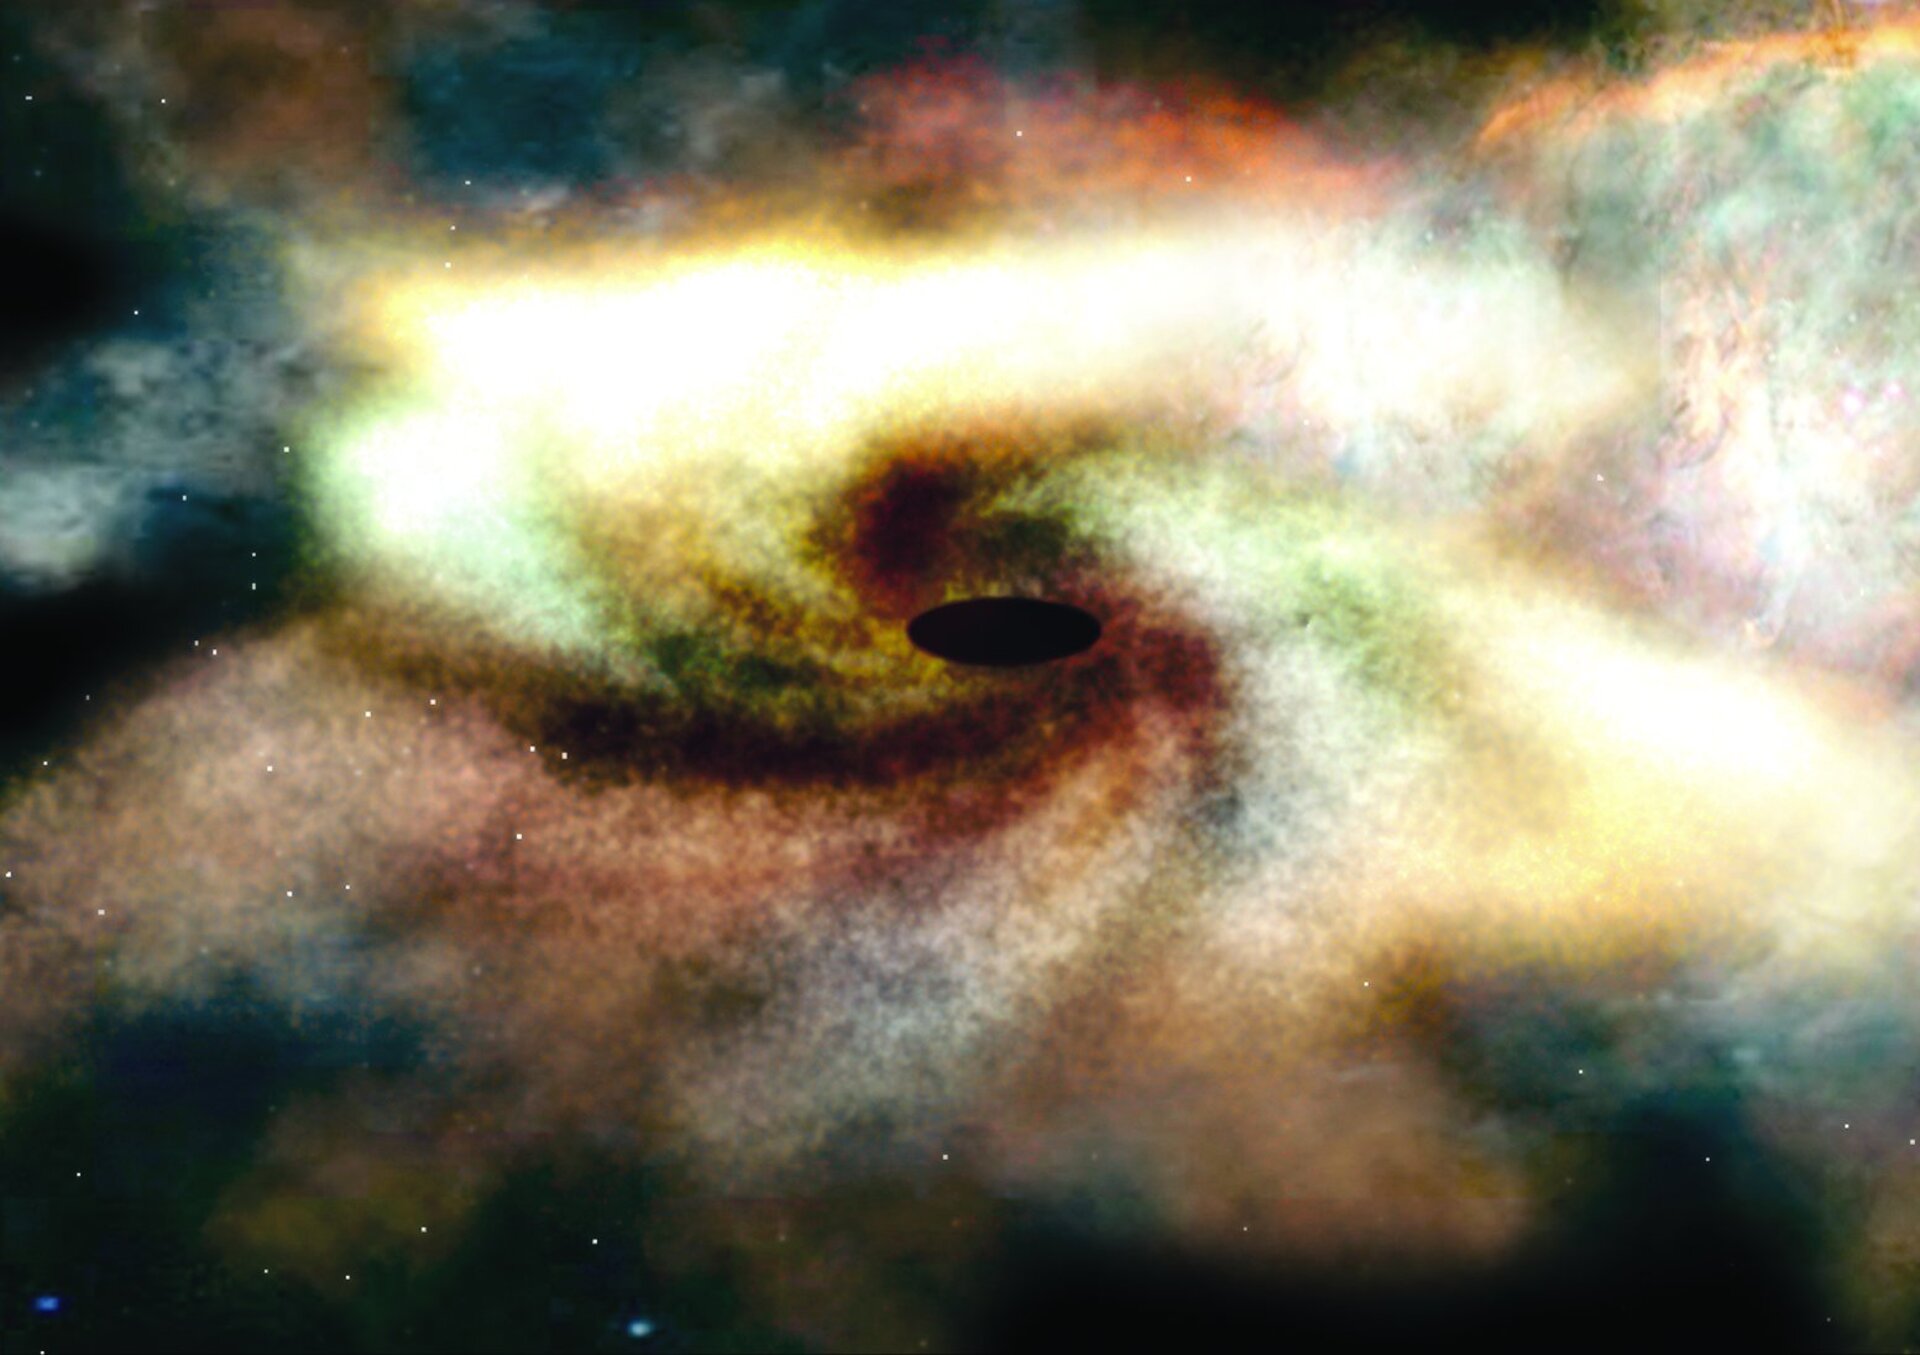 Integral  studies giant black holes hiding in the centres of galaxies